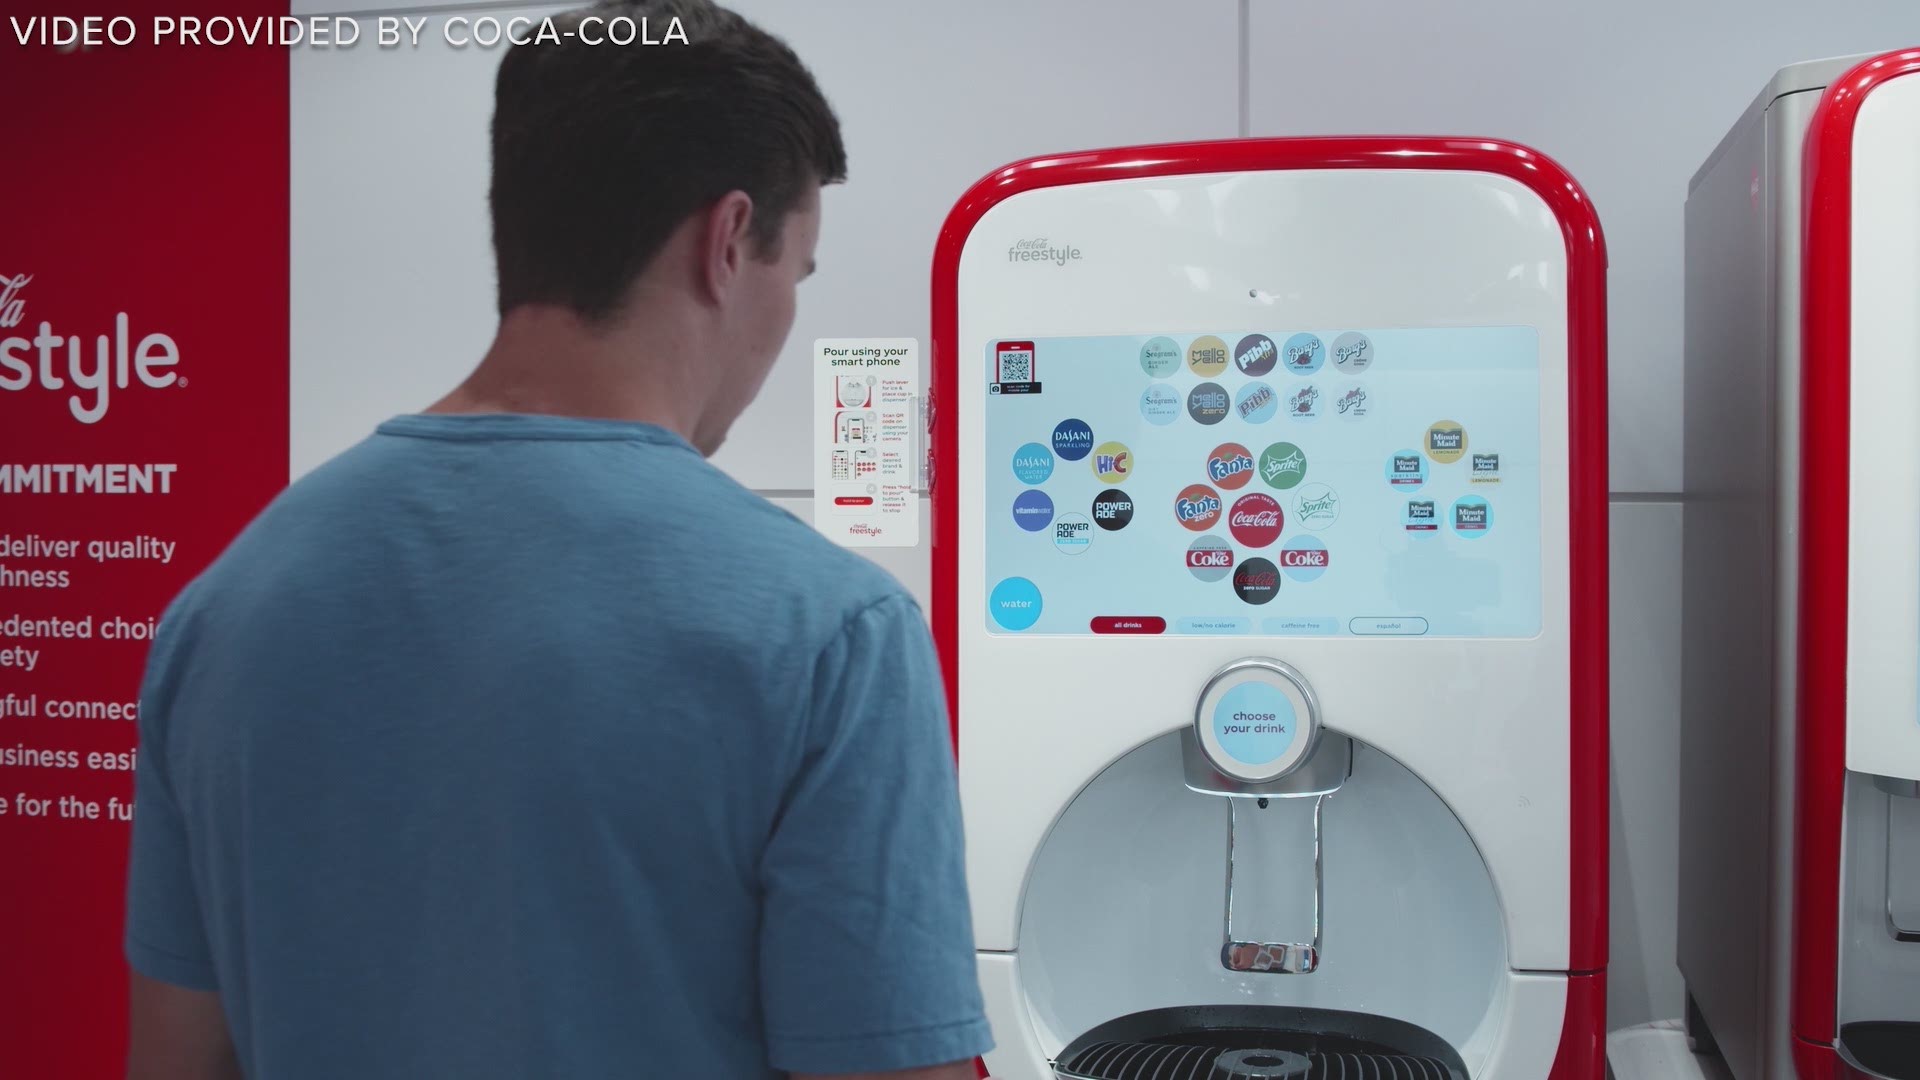 Coca-Cola's contactless Freestyle drink dispenser allows customers to pour their drink from their smartphone. (Video provided by Coca-Cola)